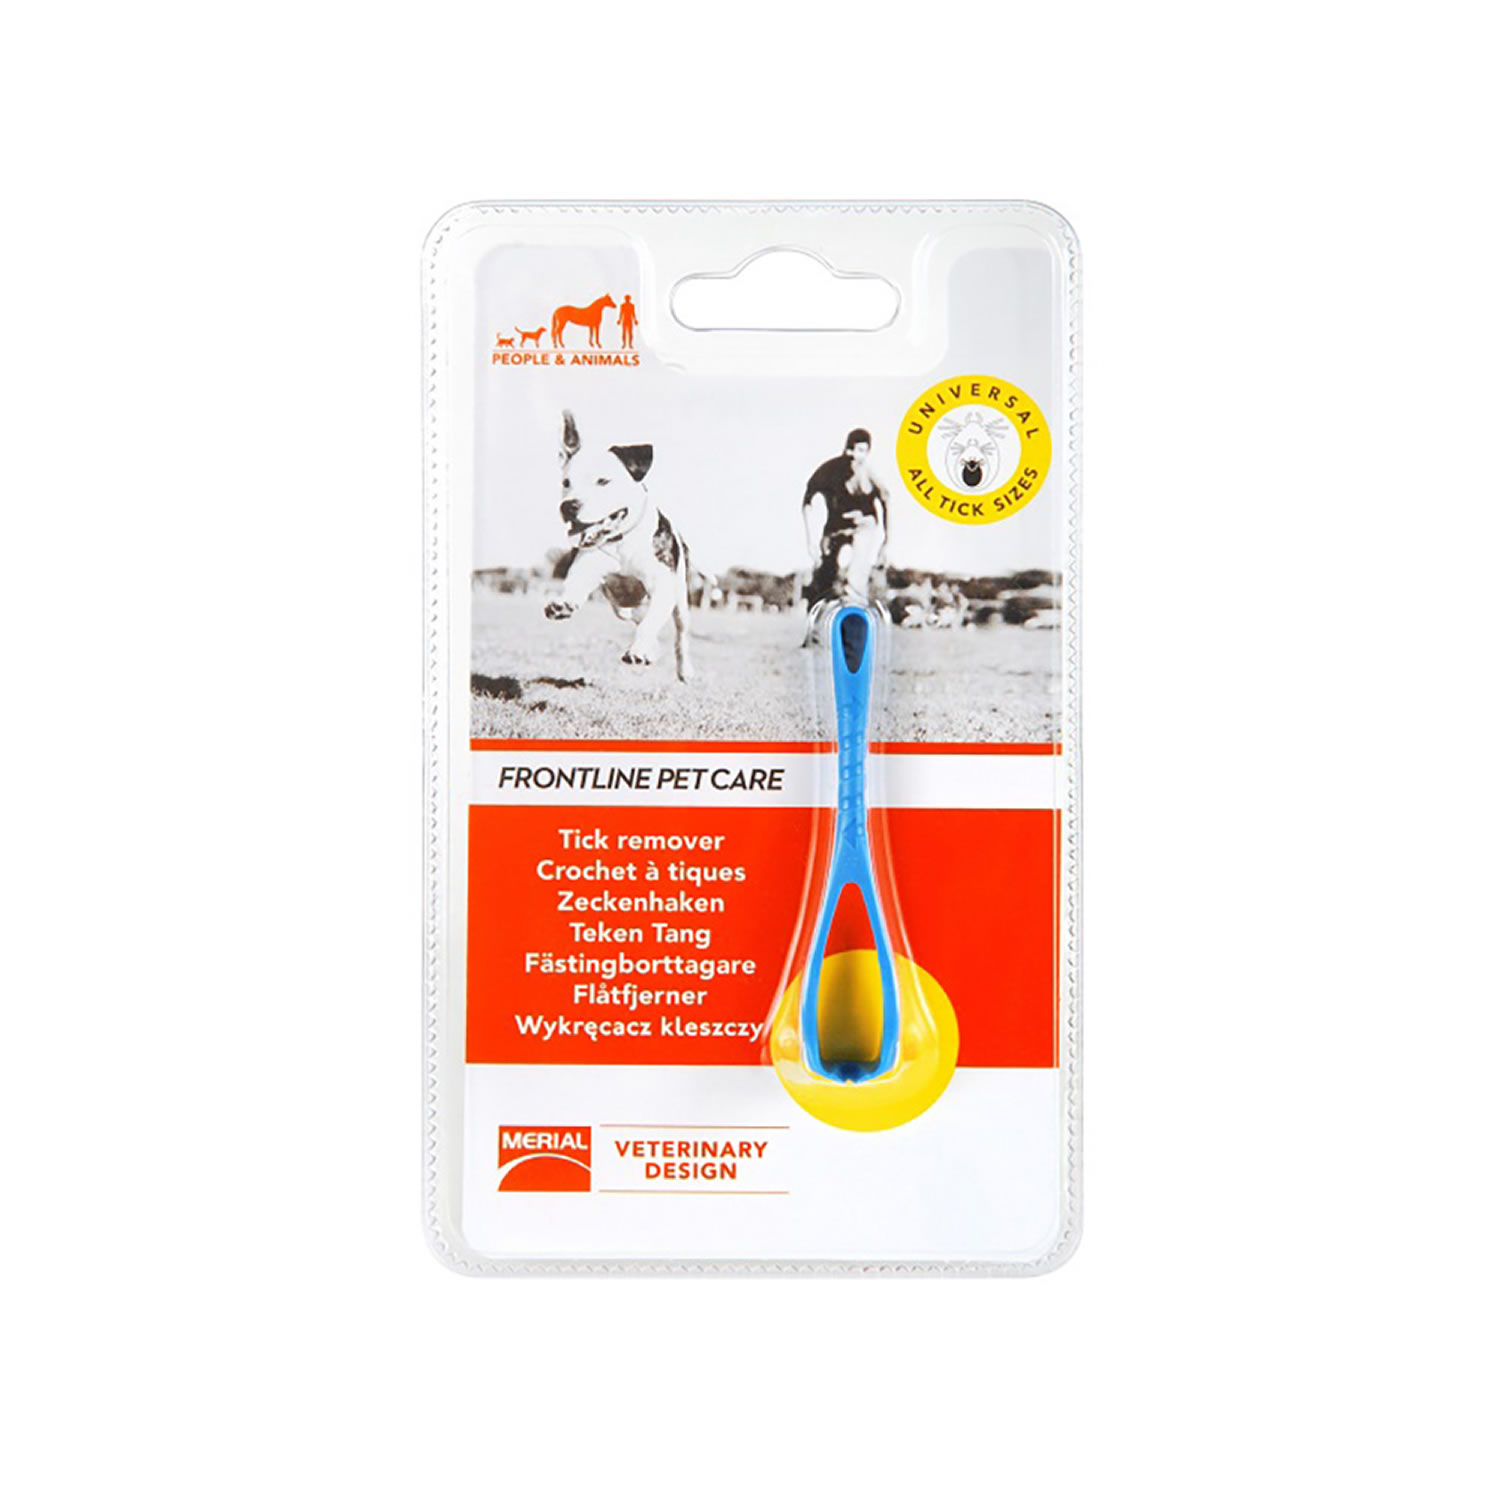 FRONTLINE PET CARE TICK REMOVER  EACH